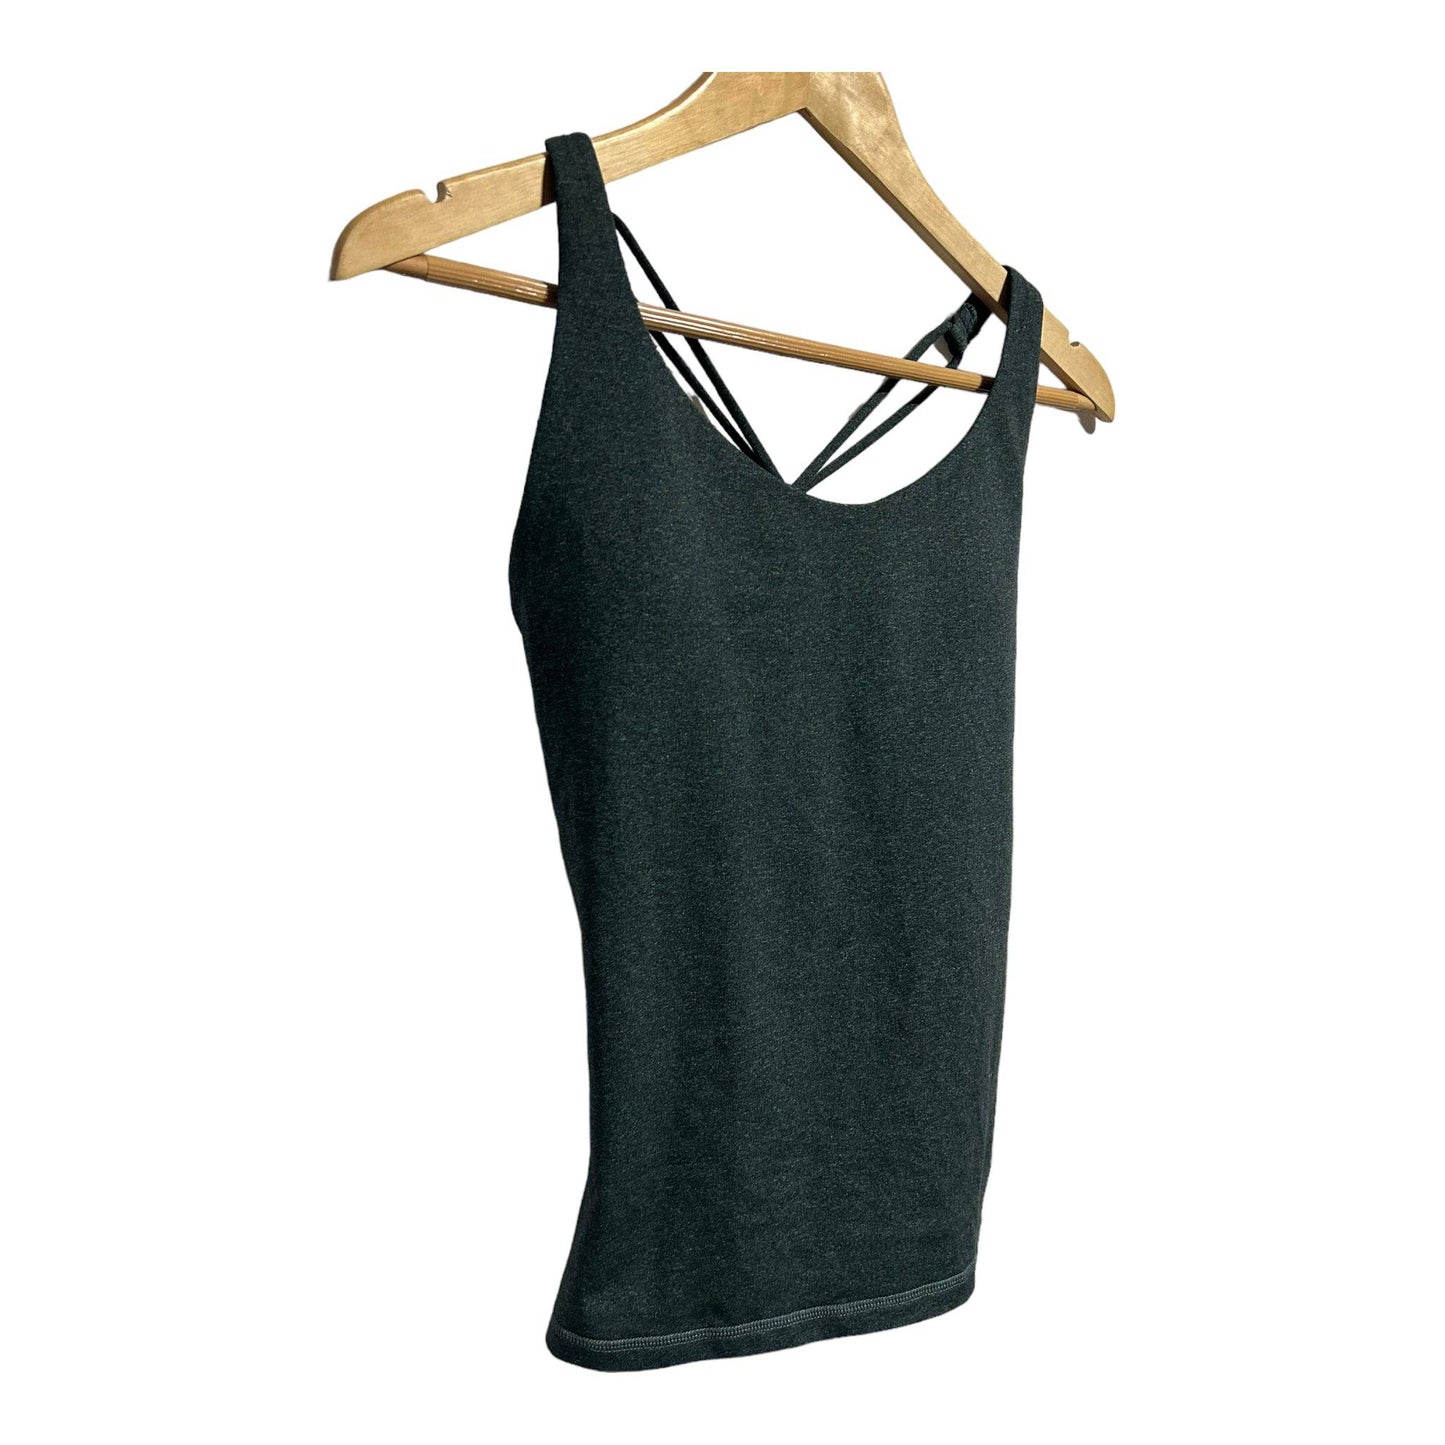 PrAna Everyday Support Top - Recurring.Life